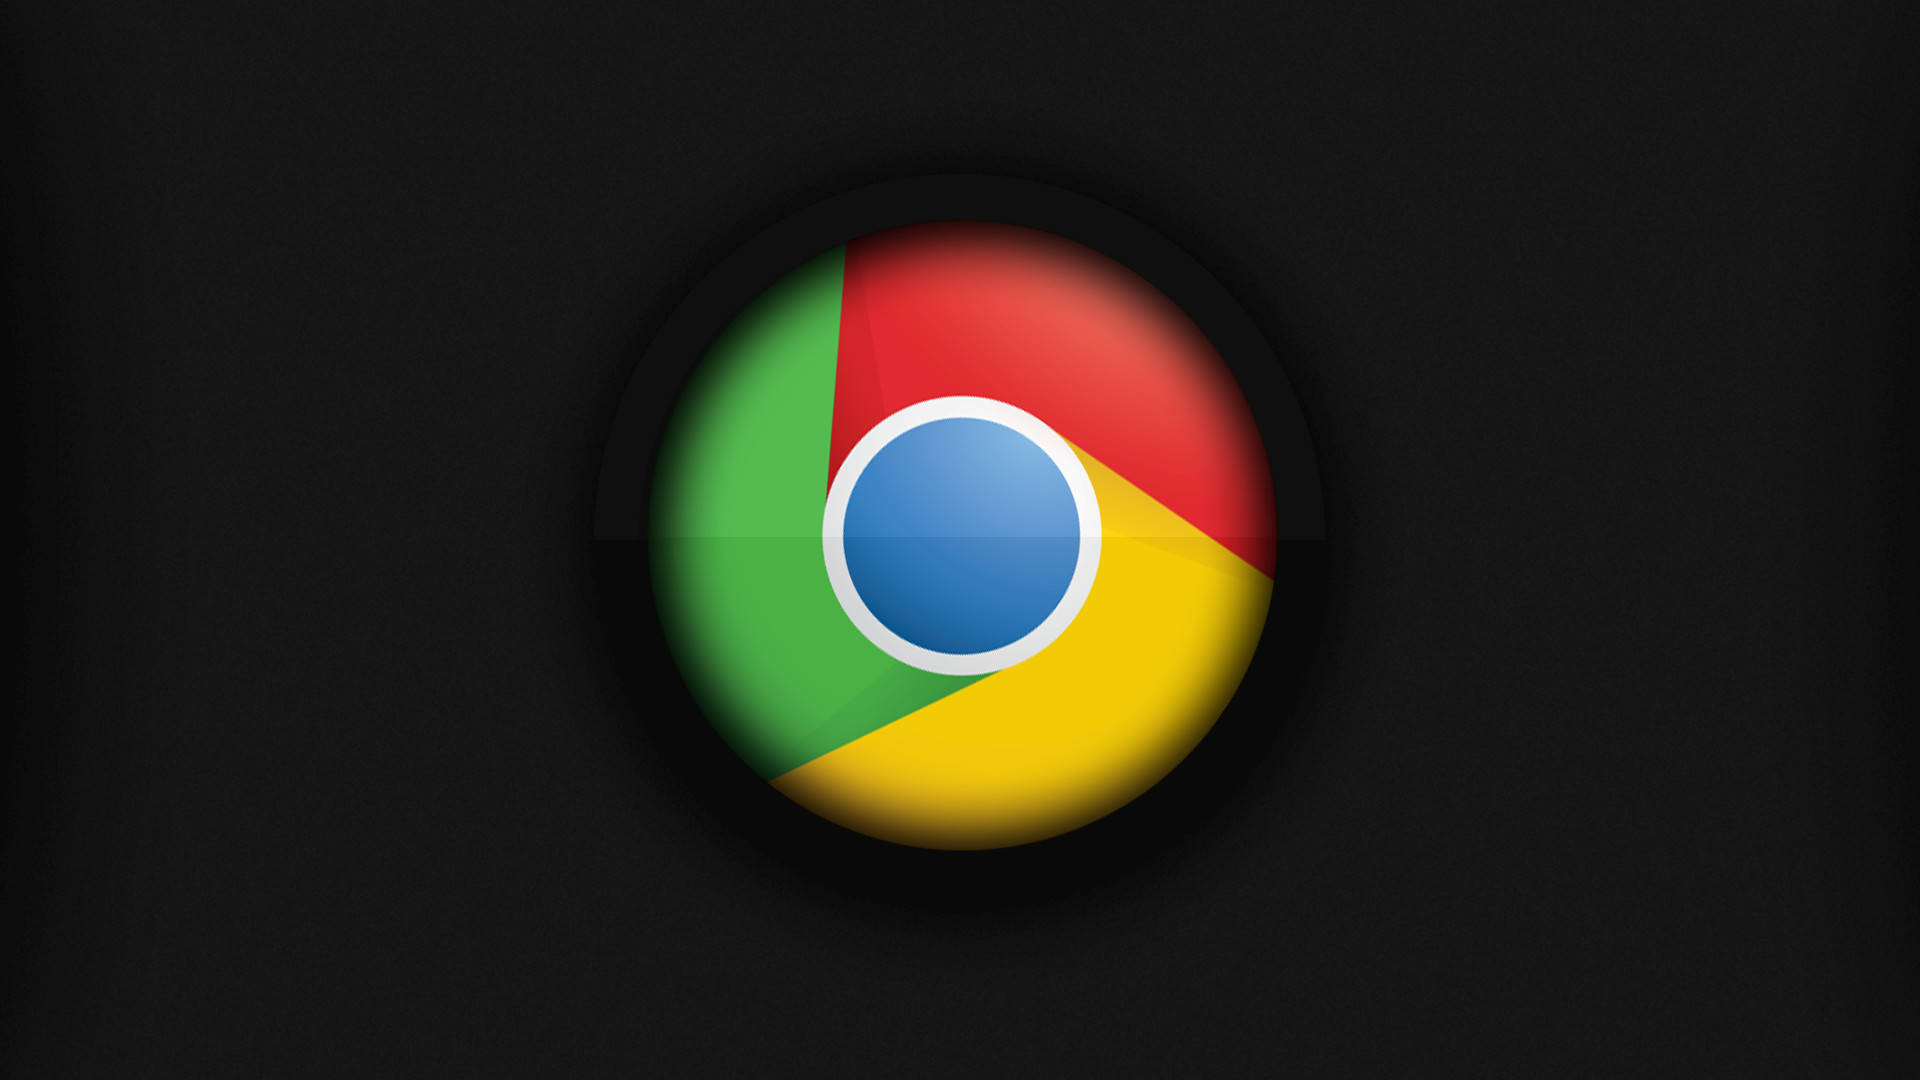 Free Chromebook Wallpaper Downloads, [100+] Chromebook Wallpapers for FREE  